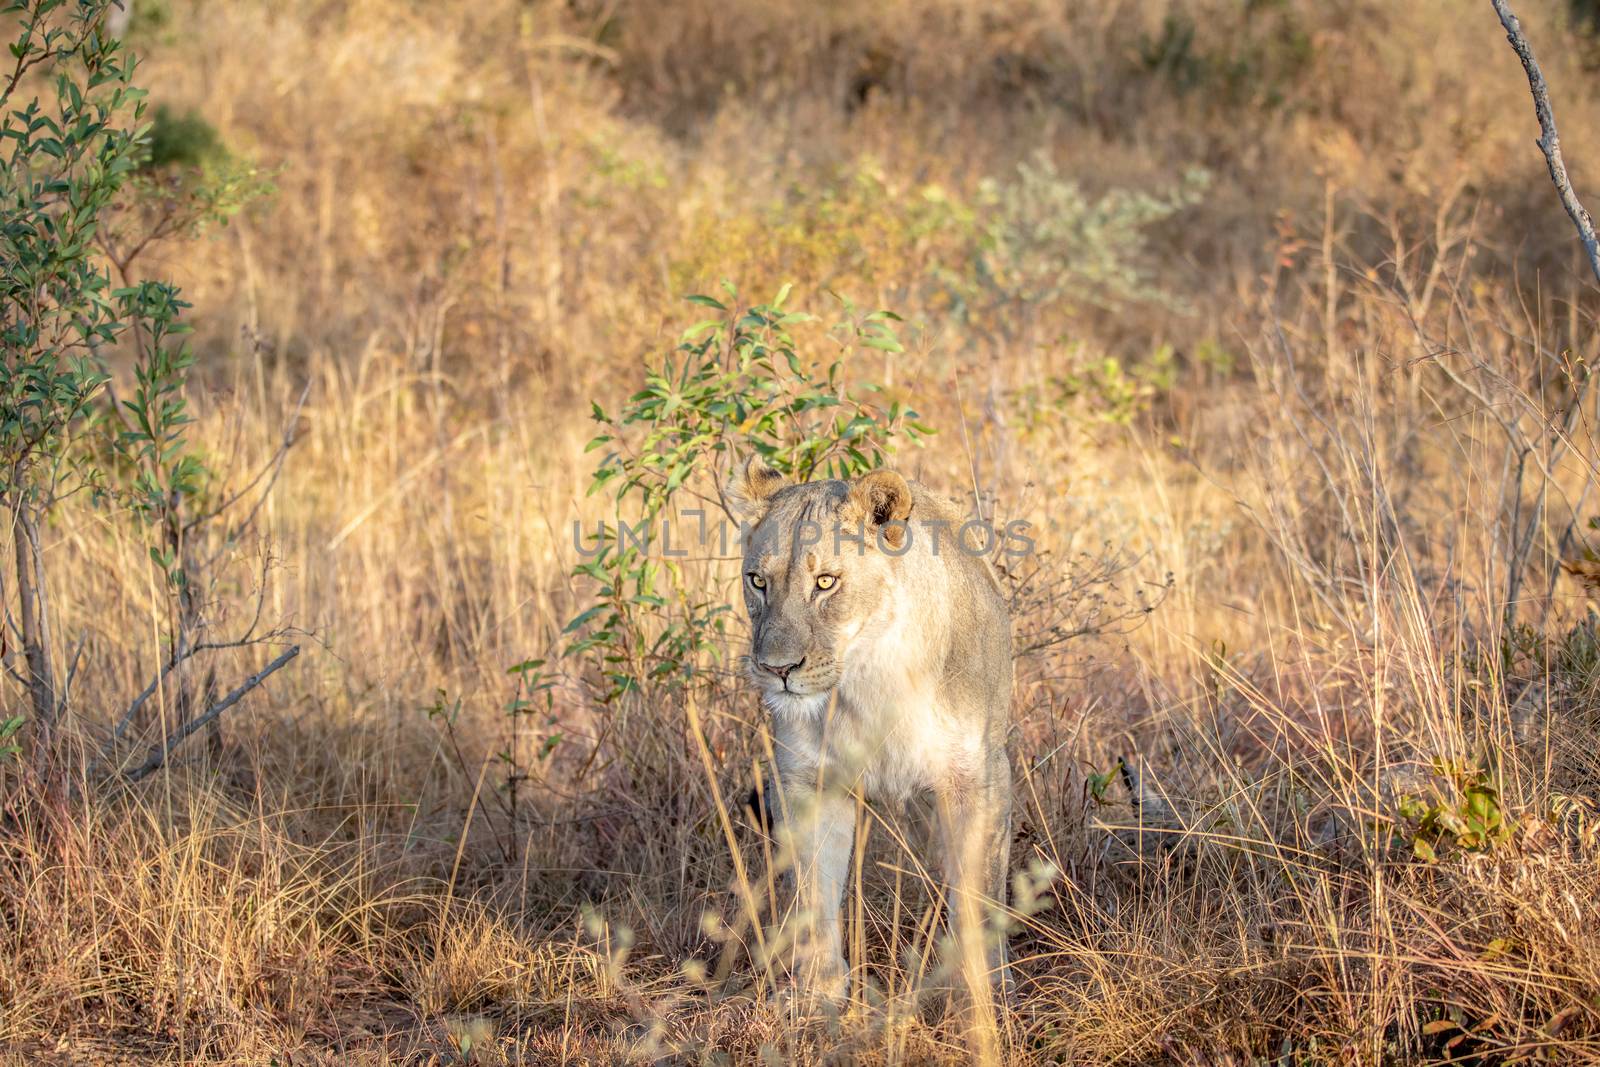 Lioness walking in the bush in the Welgevonden game reserve, South Africa.